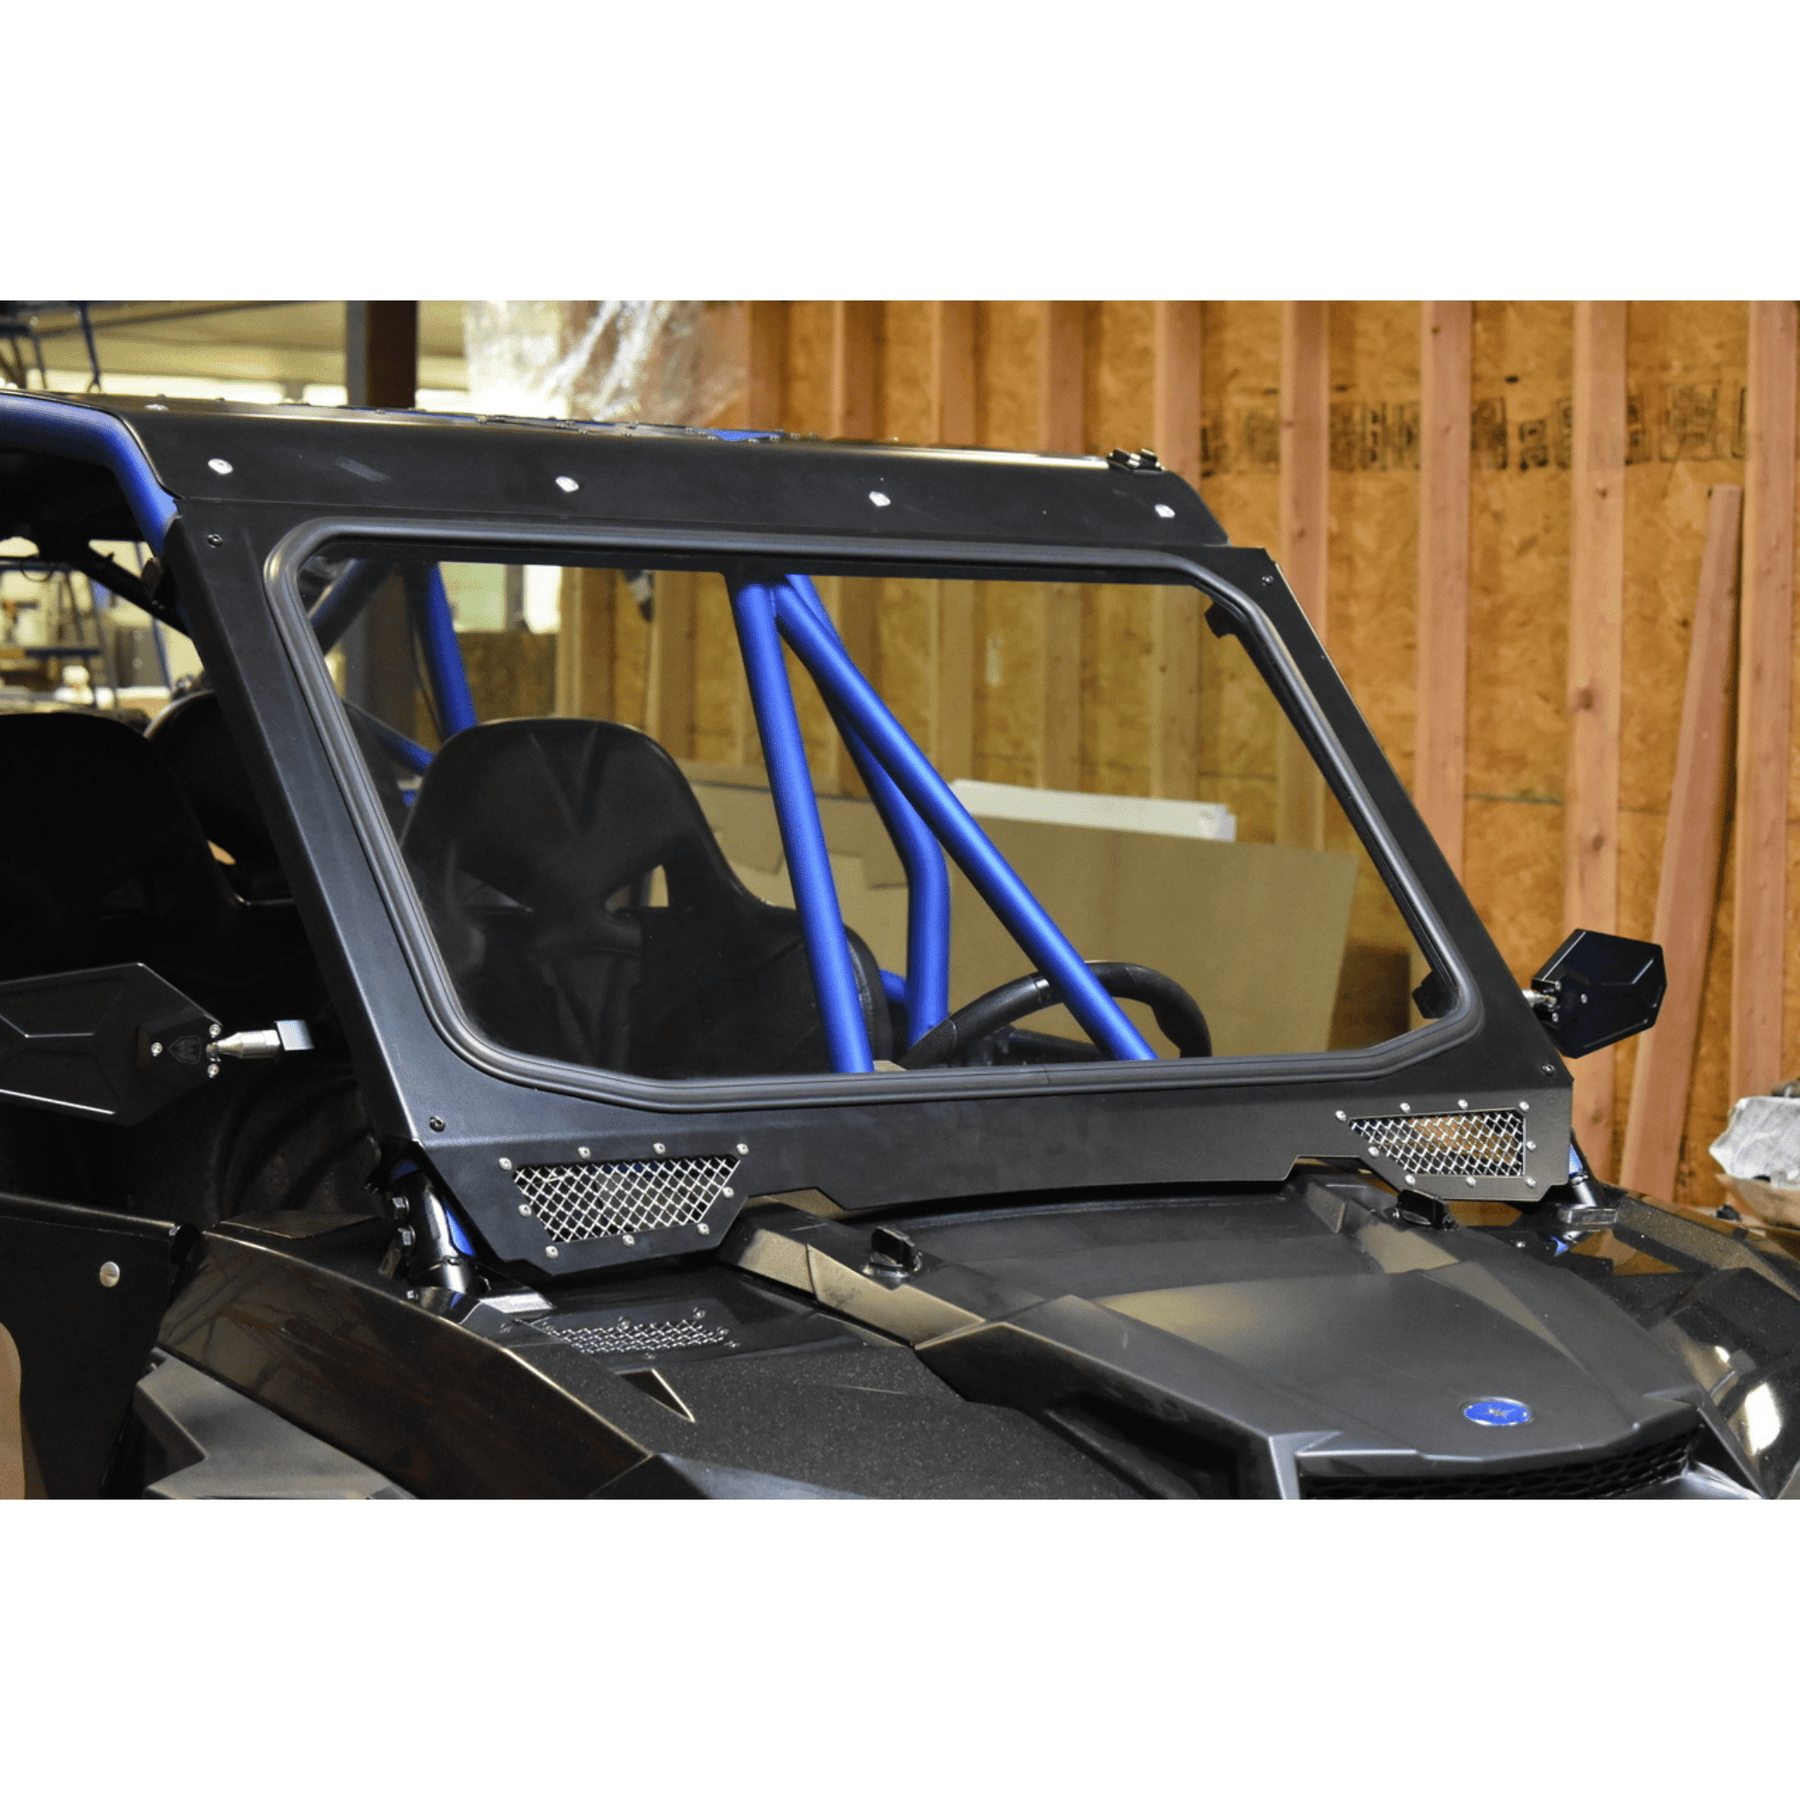 Polaris RZR 900, 1000, & Turbo Glass Windshield for CageWrx Super Shorty Cage (2014+)